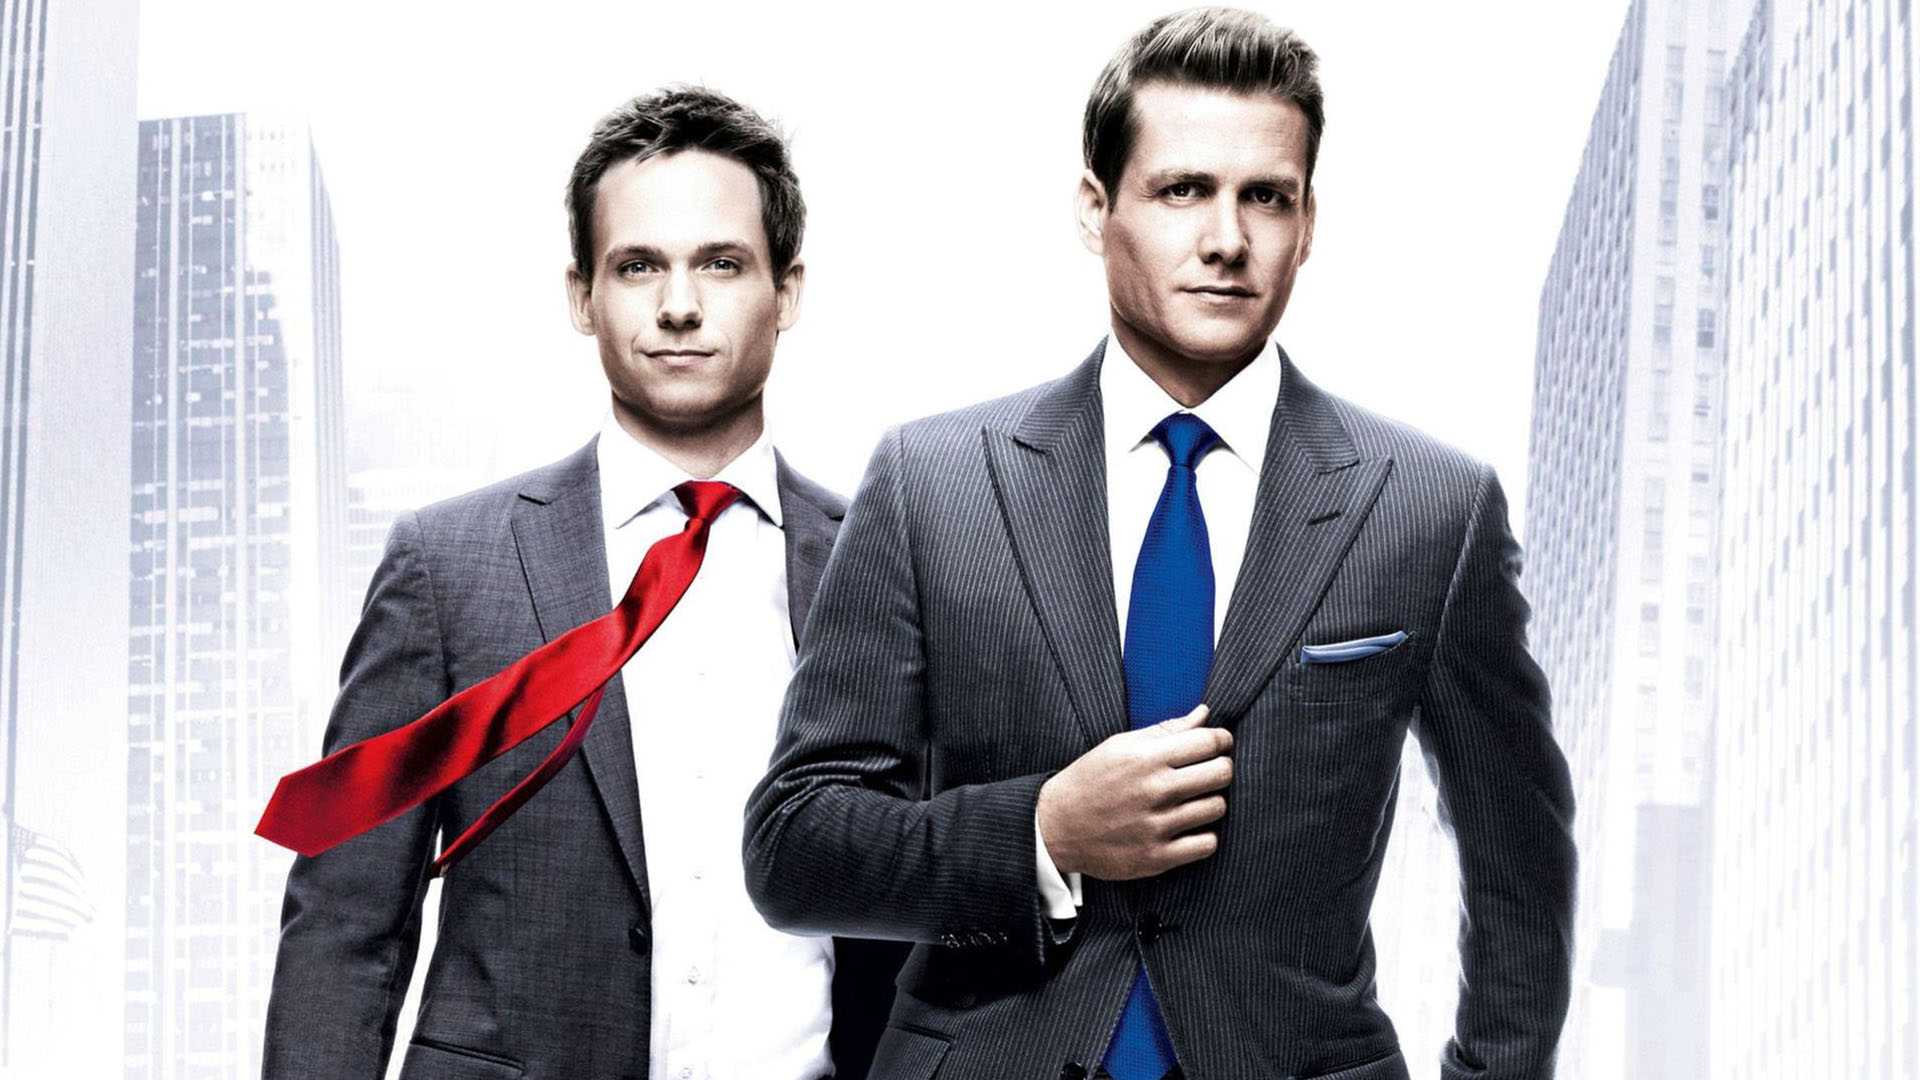 Suits Wallpapers